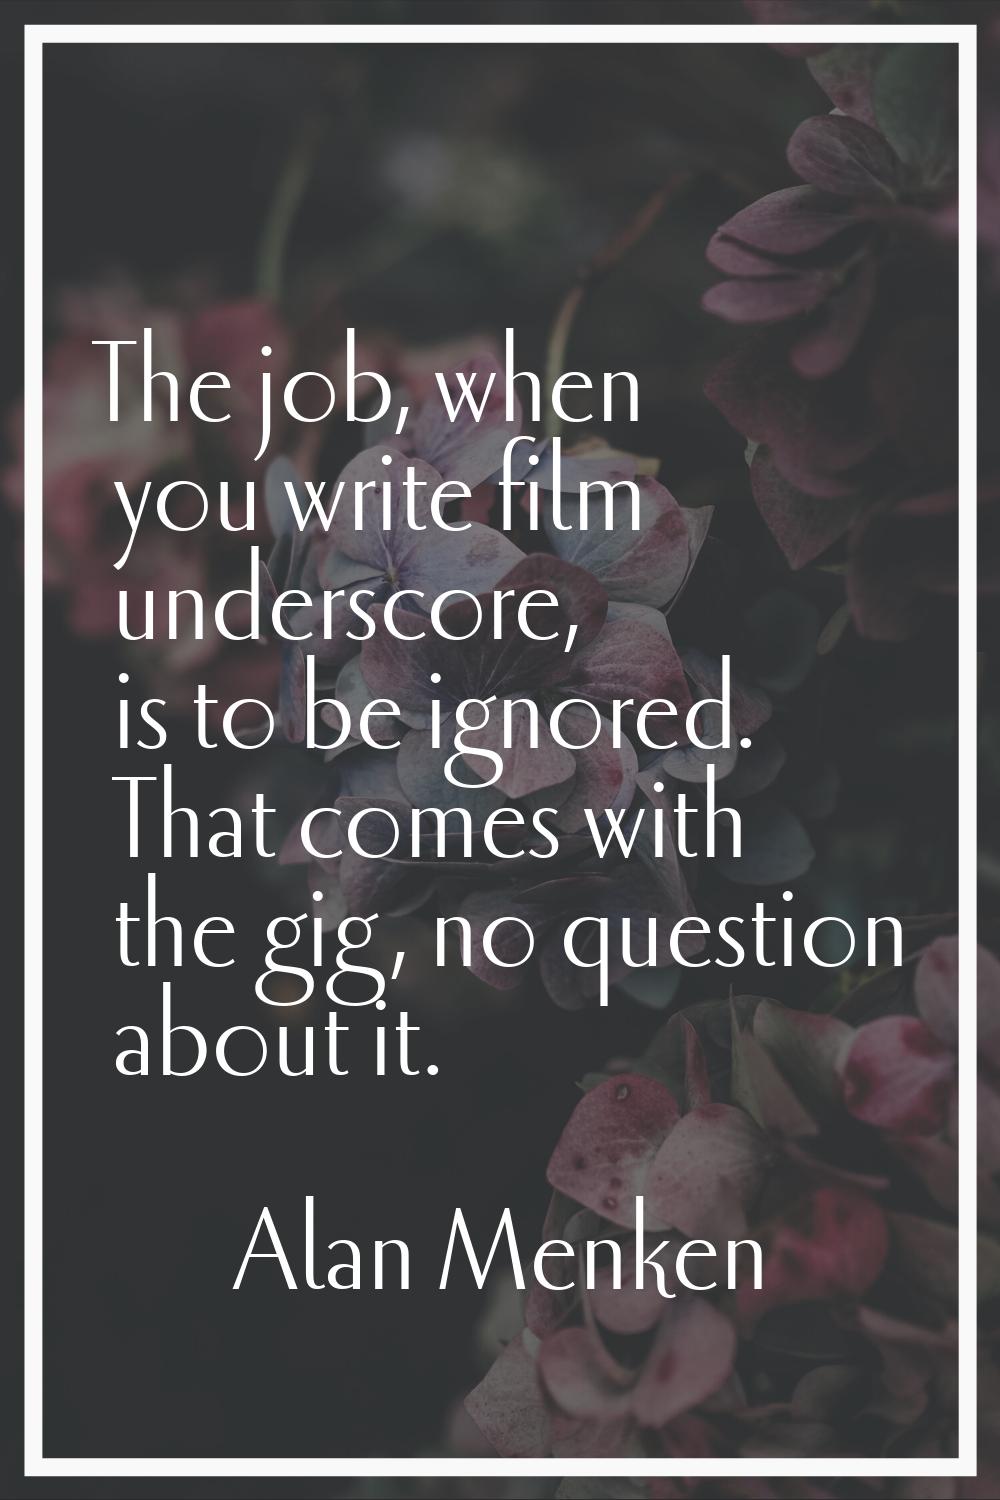 The job, when you write film underscore, is to be ignored. That comes with the gig, no question abo